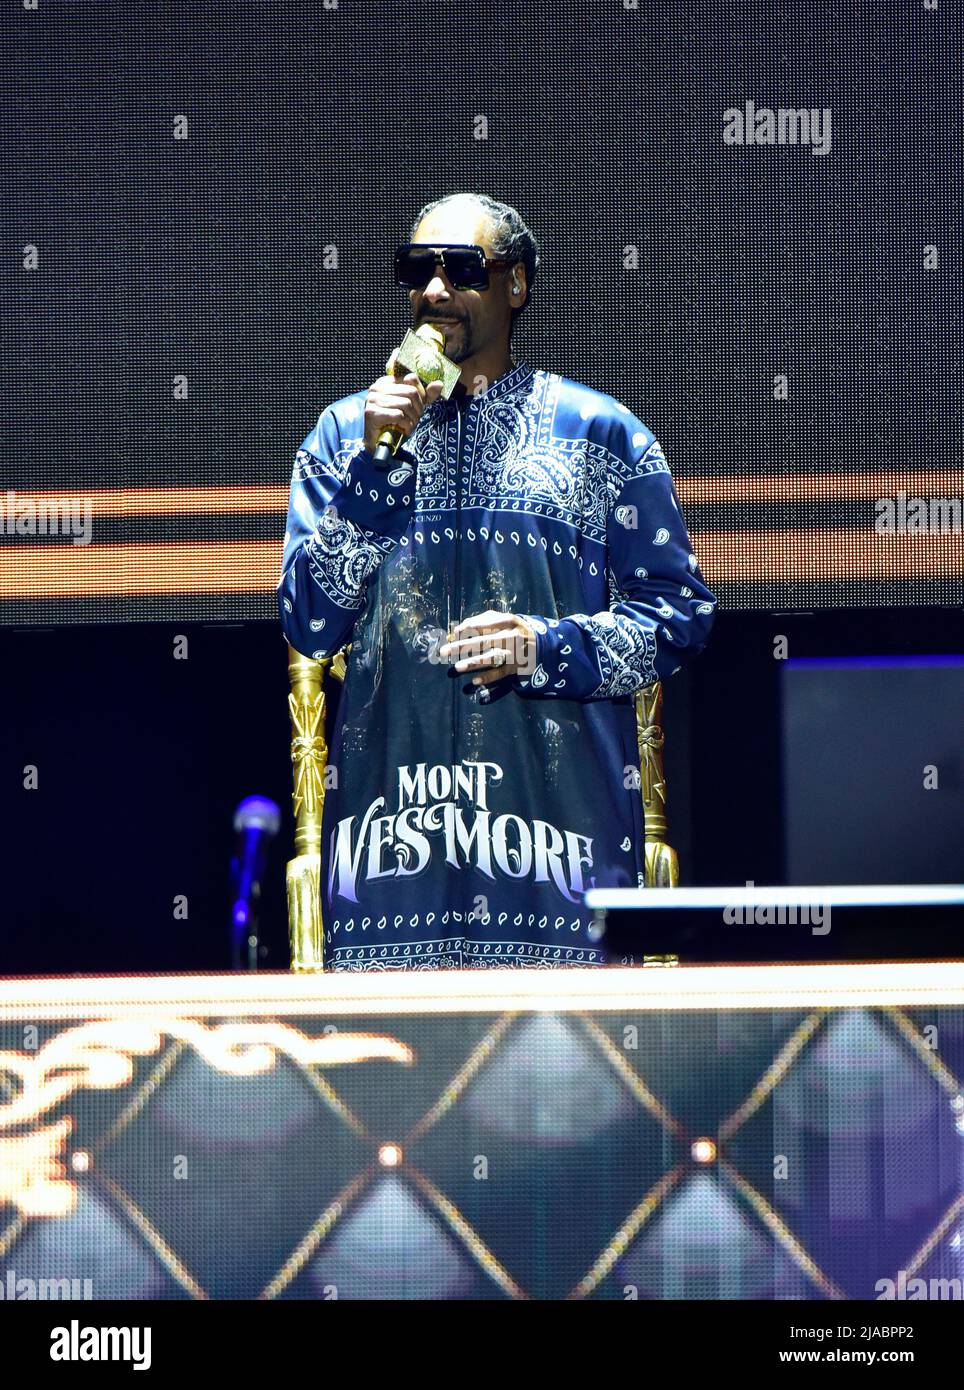 Napa, California, USA. 28th May, 2022. Snoop Dogg with Mount Westmore, West Coast Hip Hop supergroup, performing on stage day 2 of BottleRock 2022 Music Festival. Credit: Ken Howard/Alamy Live News Stock Photo